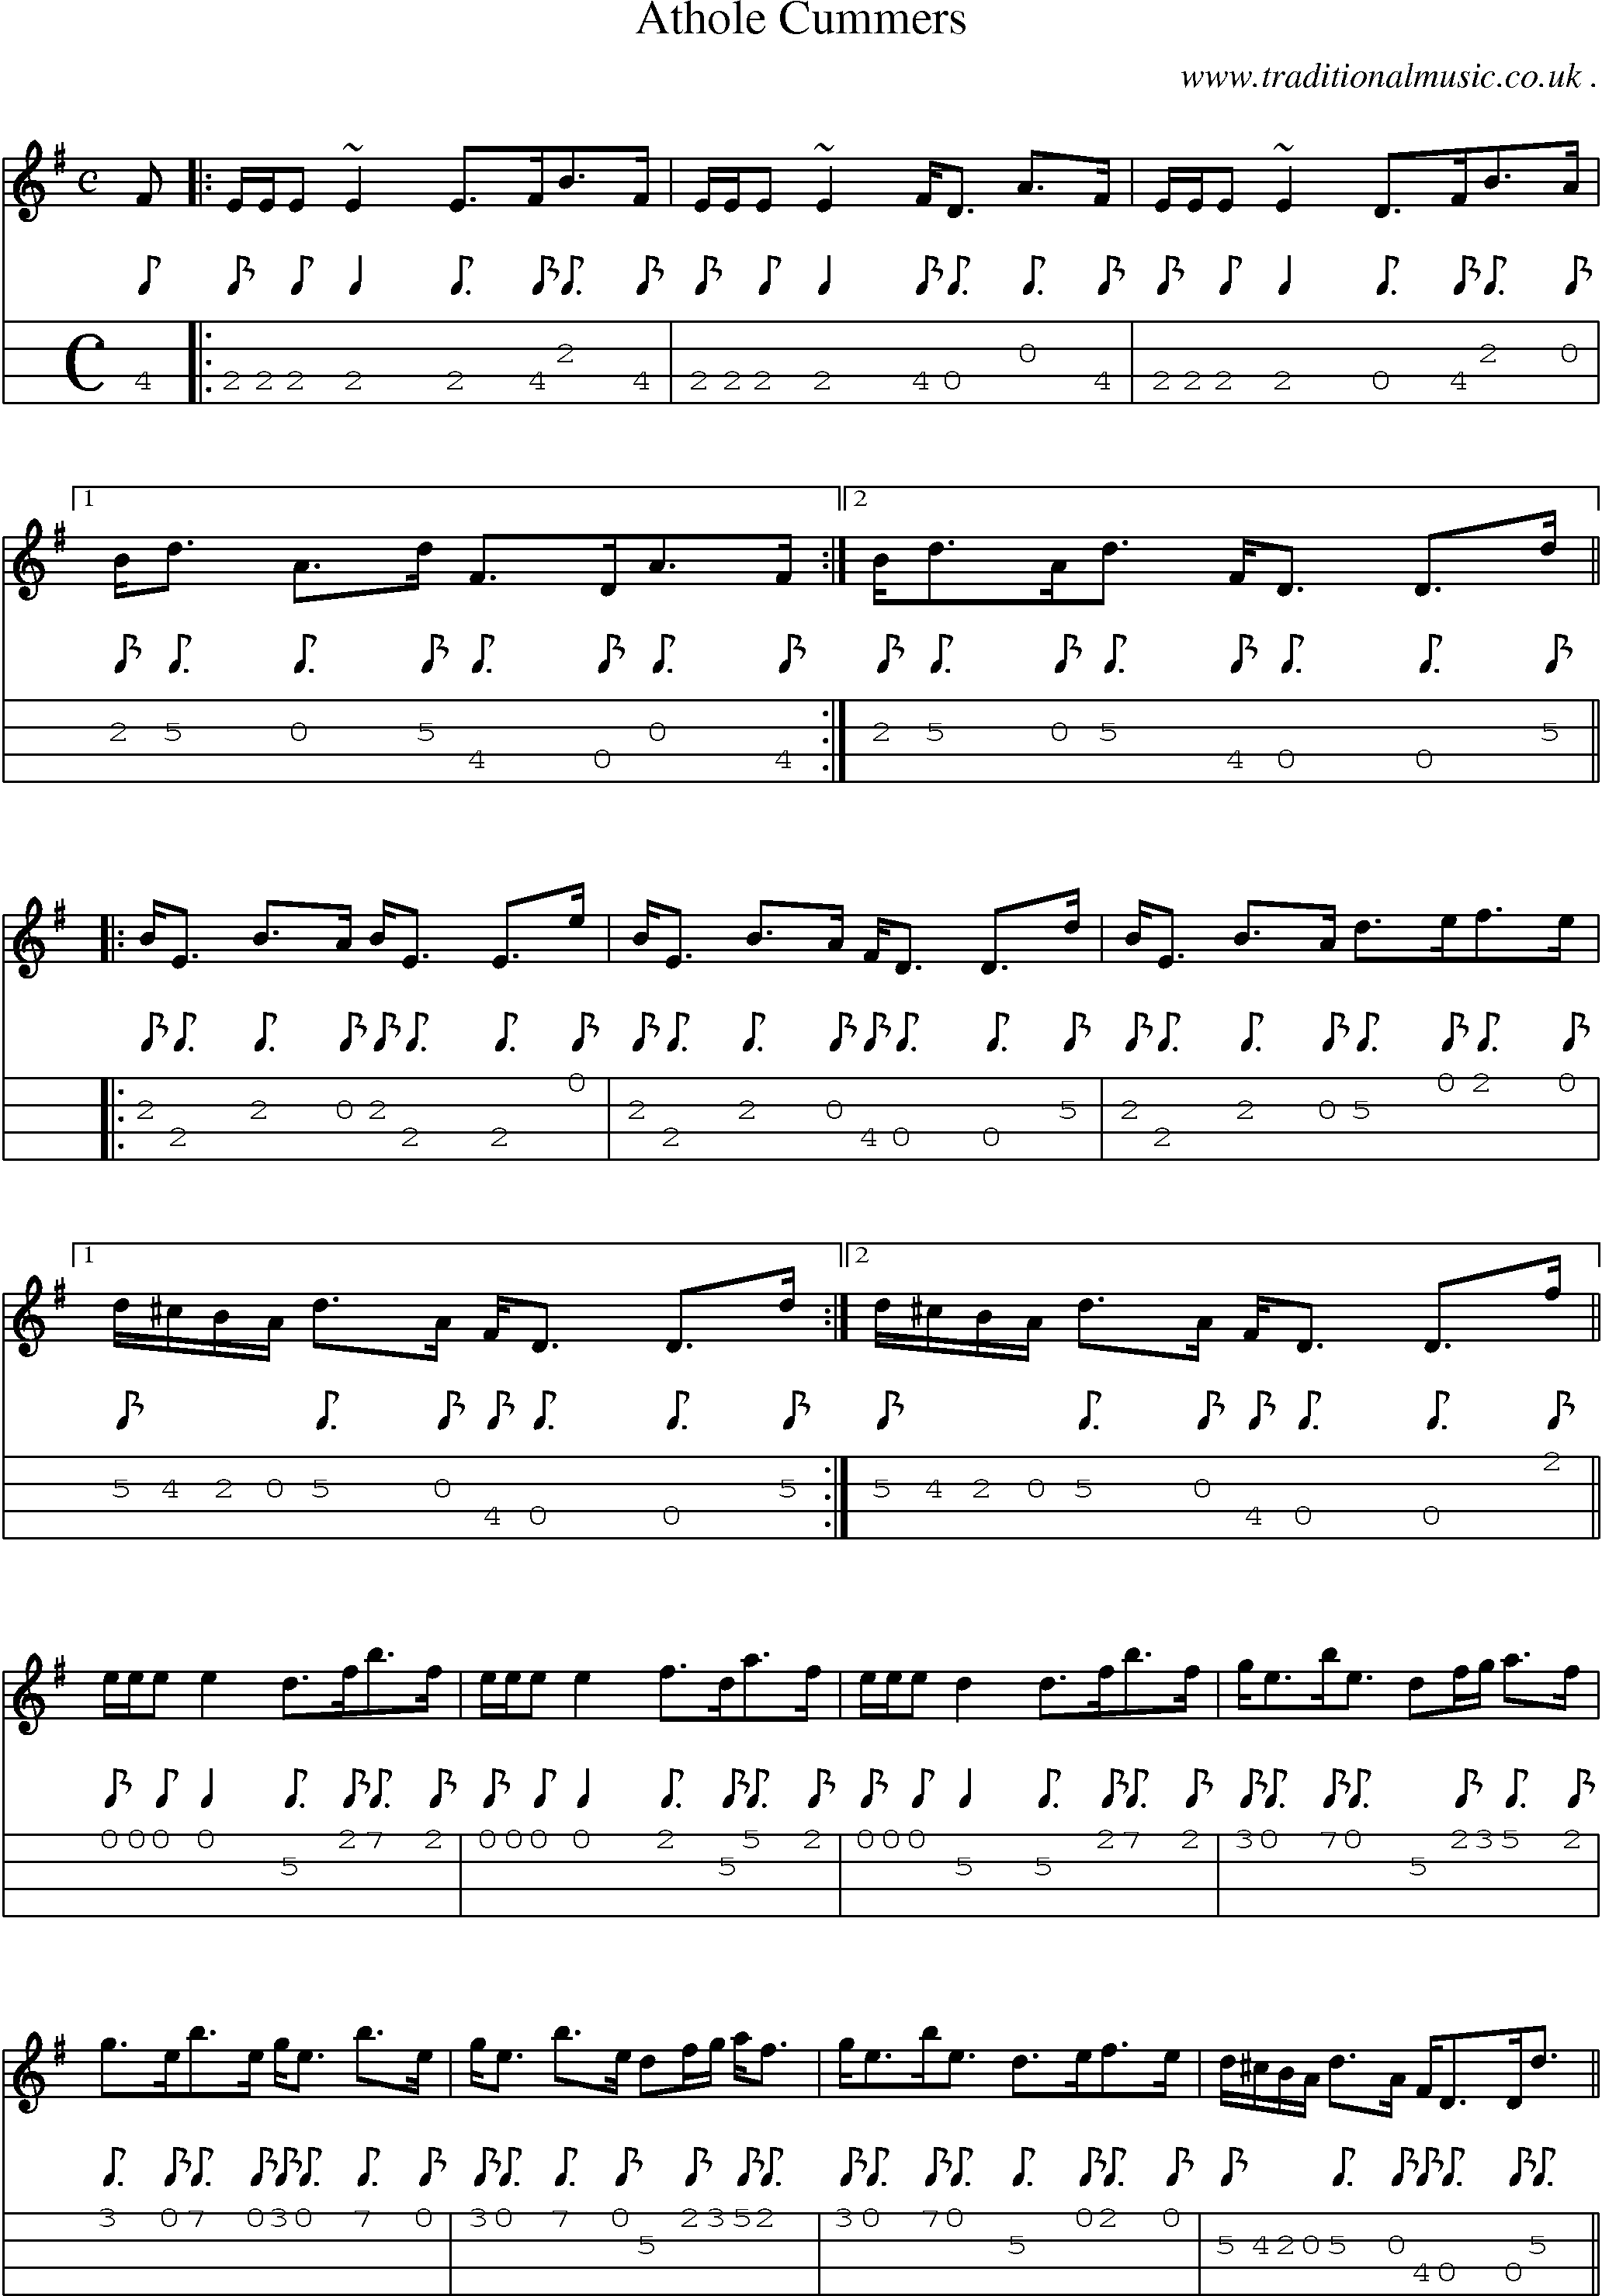 Sheet-music  score, Chords and Mandolin Tabs for Athole Cummers